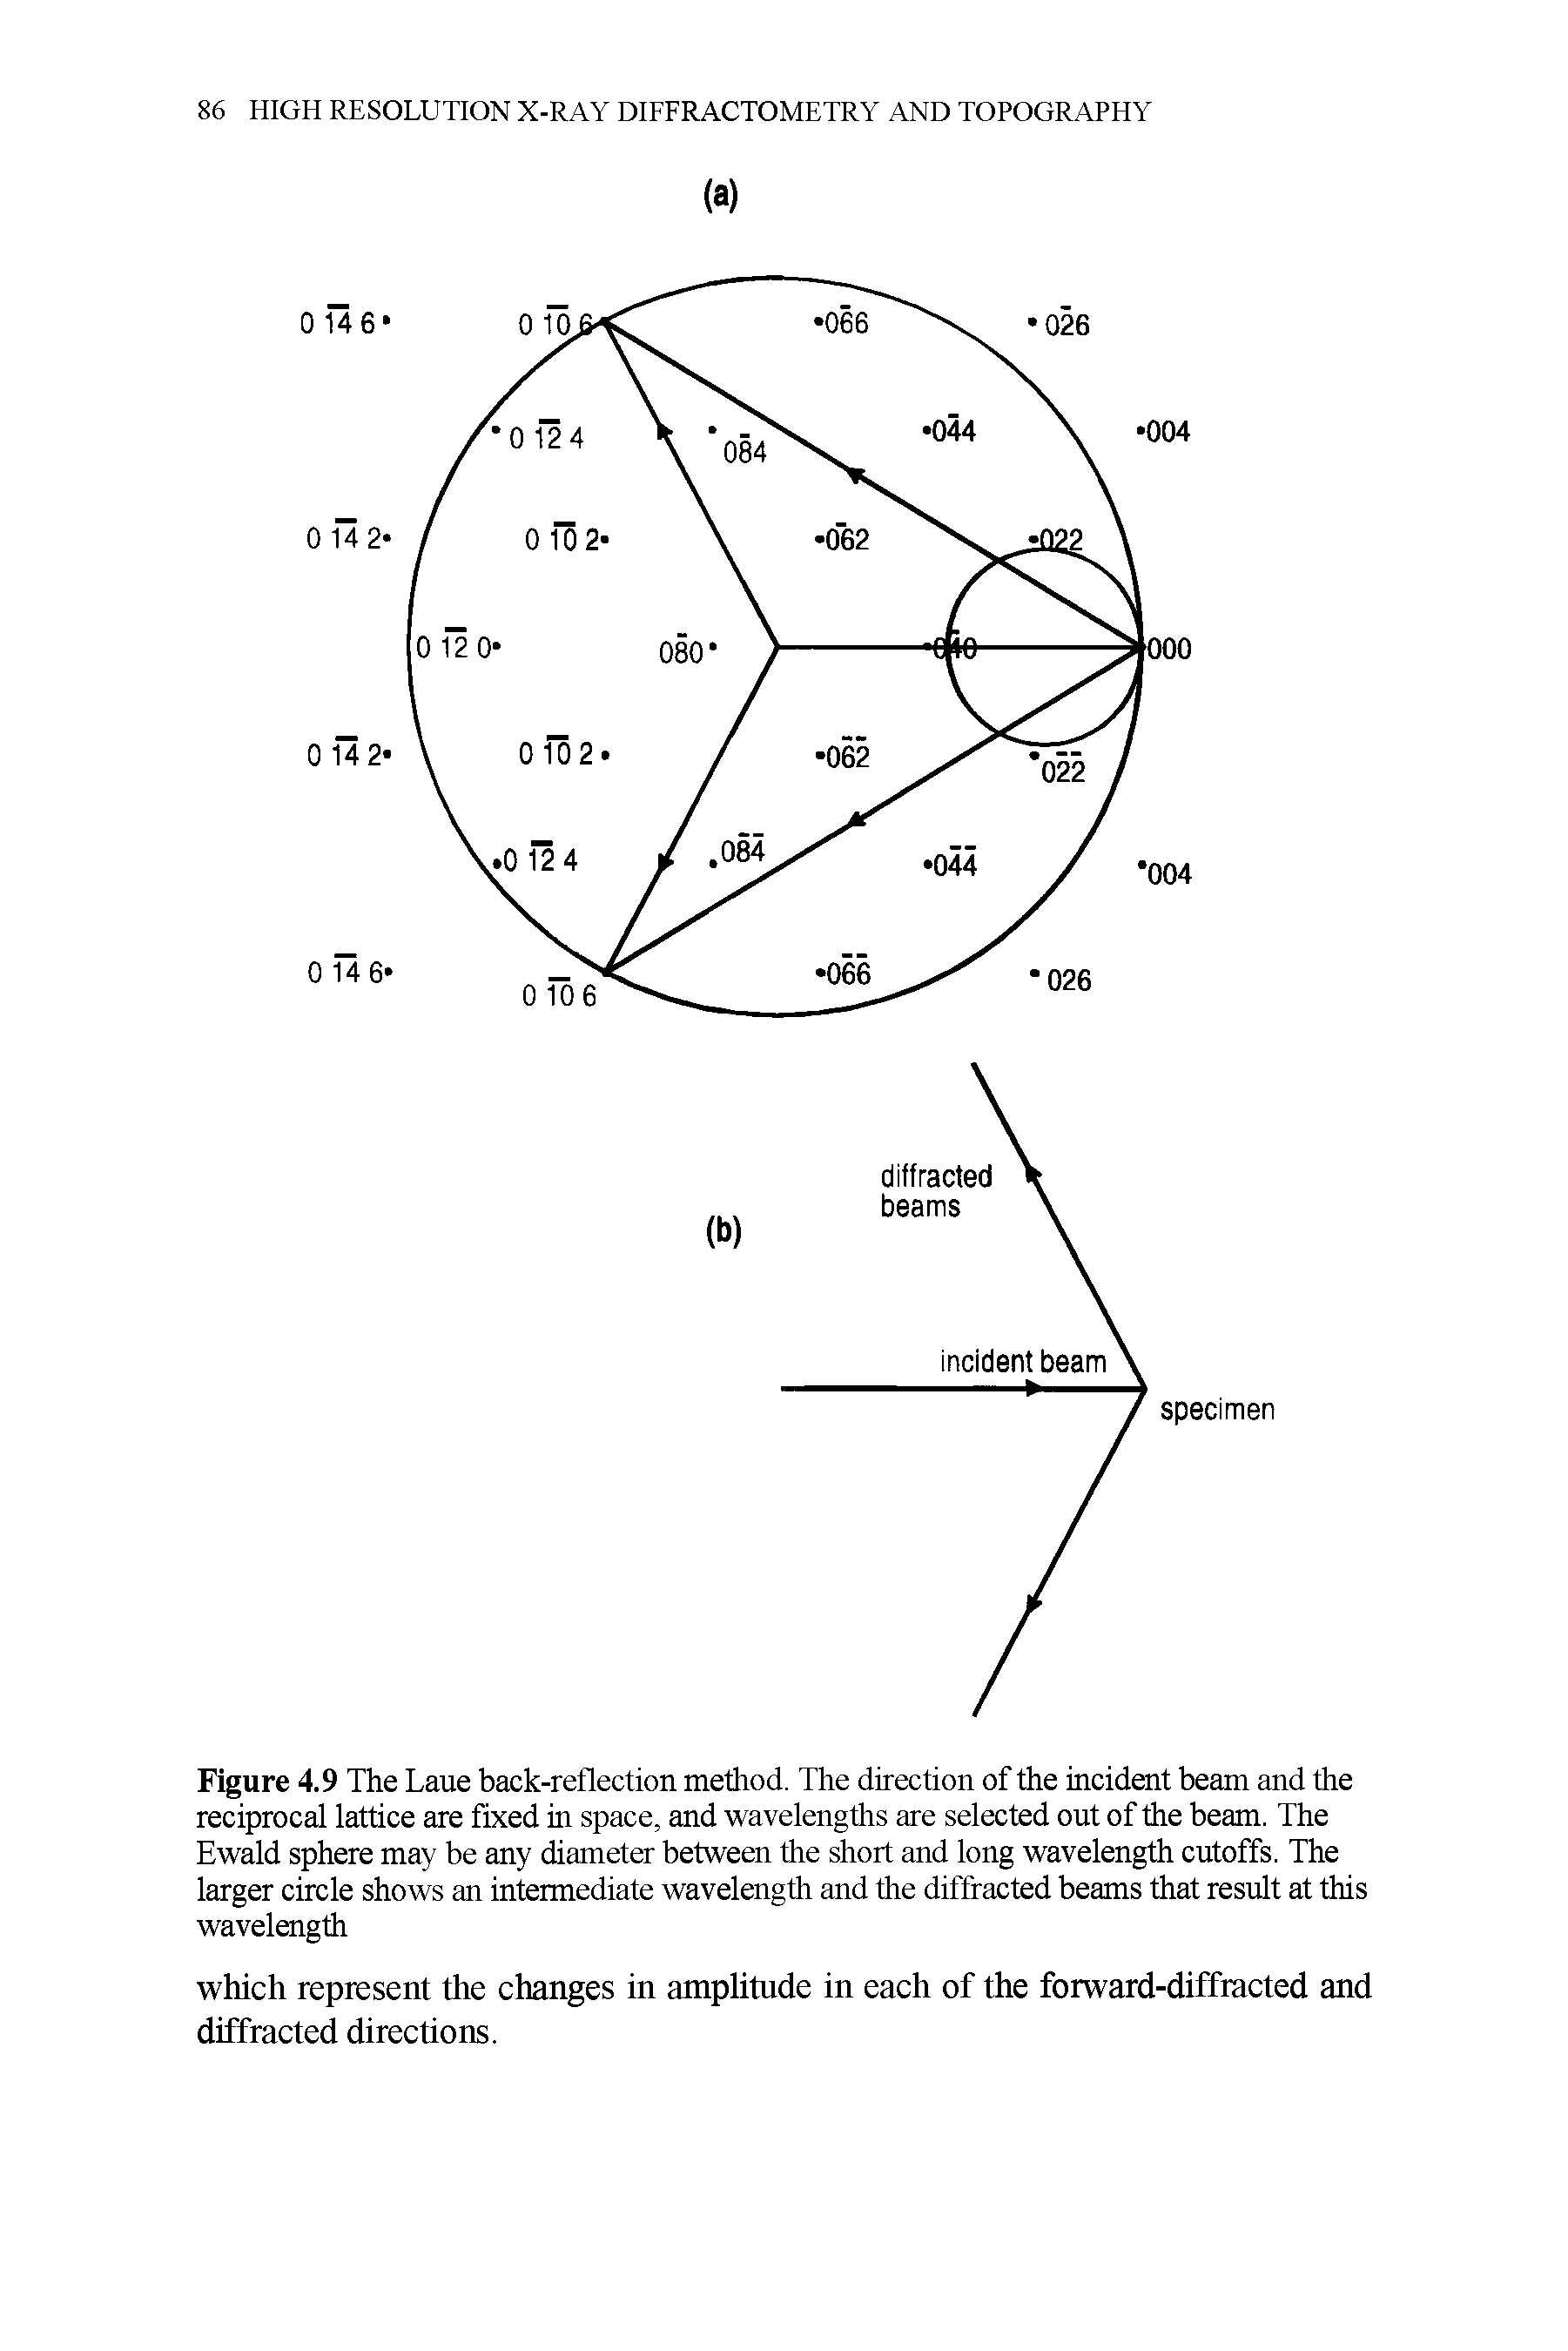 Figure 4.9 The Laue back-reflection method. The direction of the incident beam and the reciprocal lattice are fixed in space, and wavelengths are selected out of the beam. The Ewald sphere may be any diameter between the short and long wavelength cutoffs. The larger circle shows an intermediate wavelength and the diffracted beams that result at this wavelength...